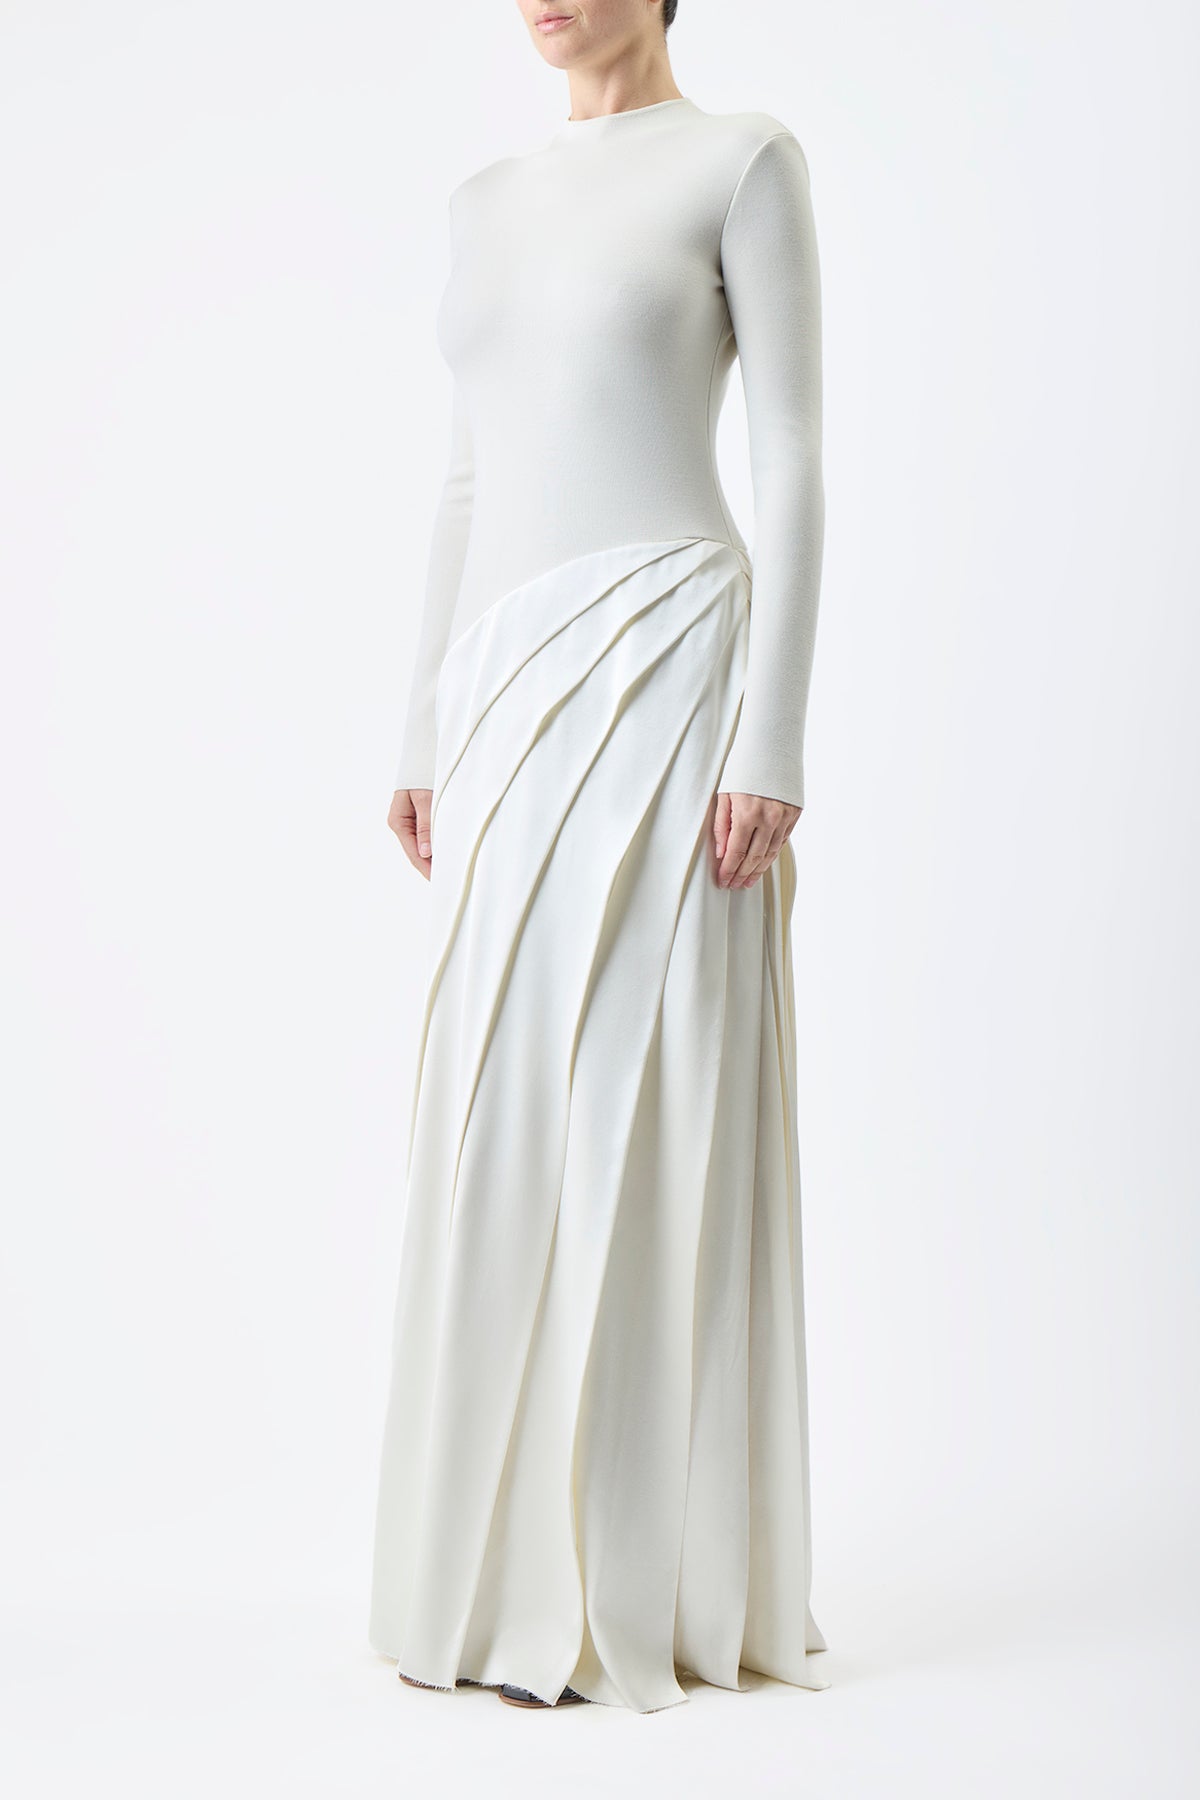 Ismay Pleated Dress in Double Satin